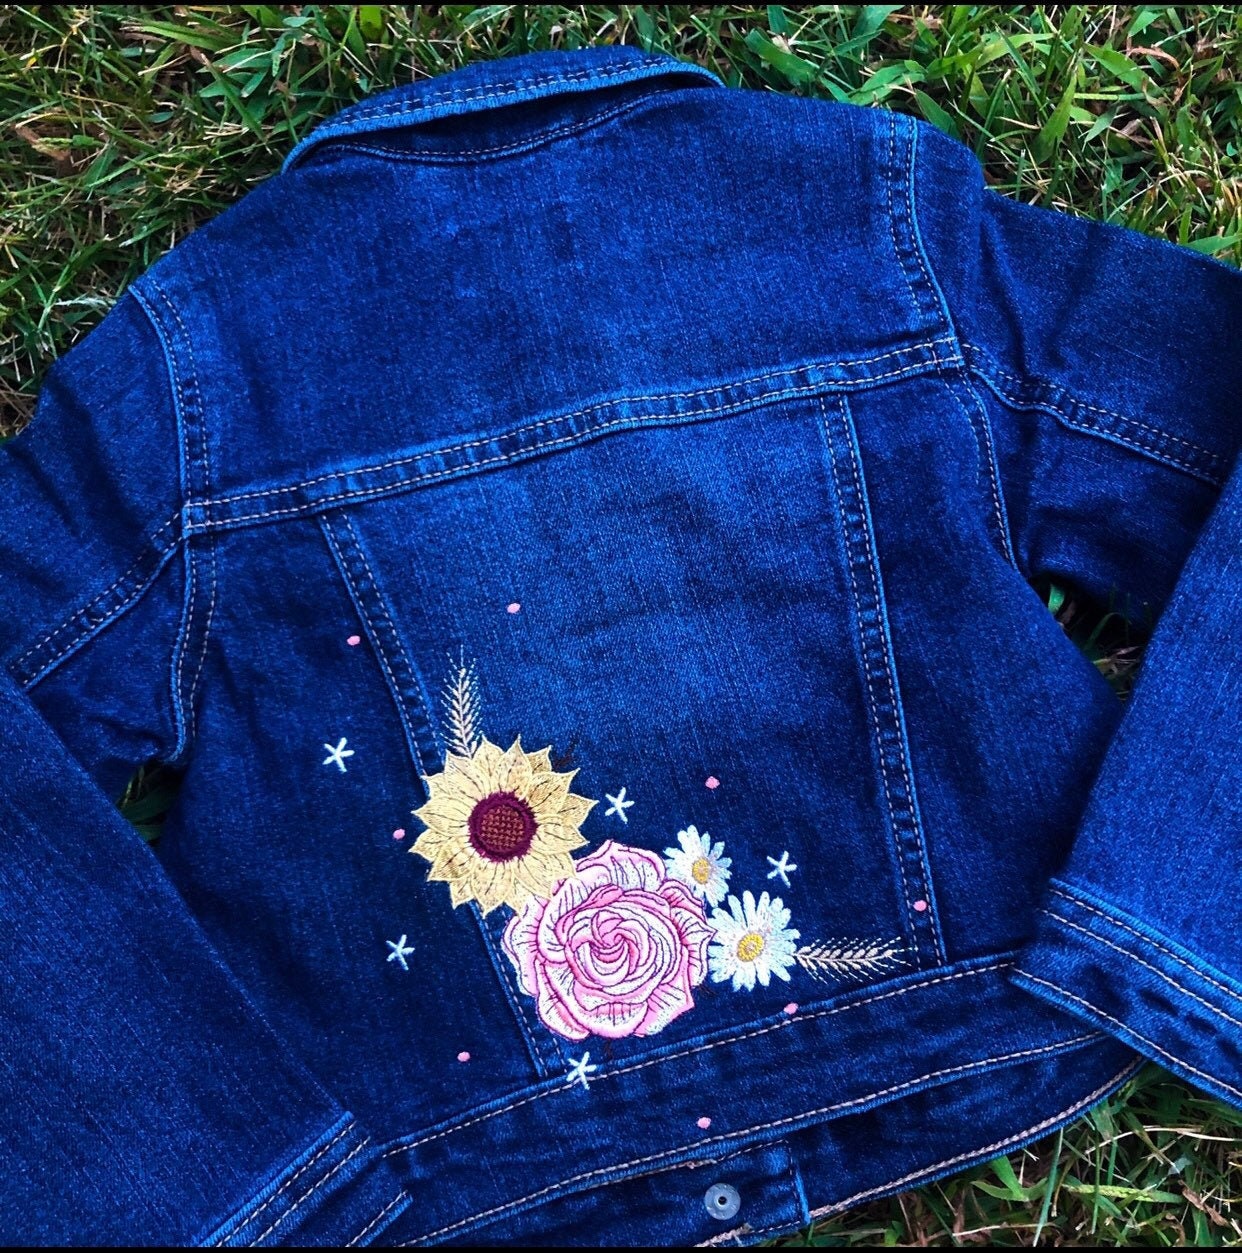 Toddler Personalized Denim Jacket with Sunflowers Roses and | Etsy